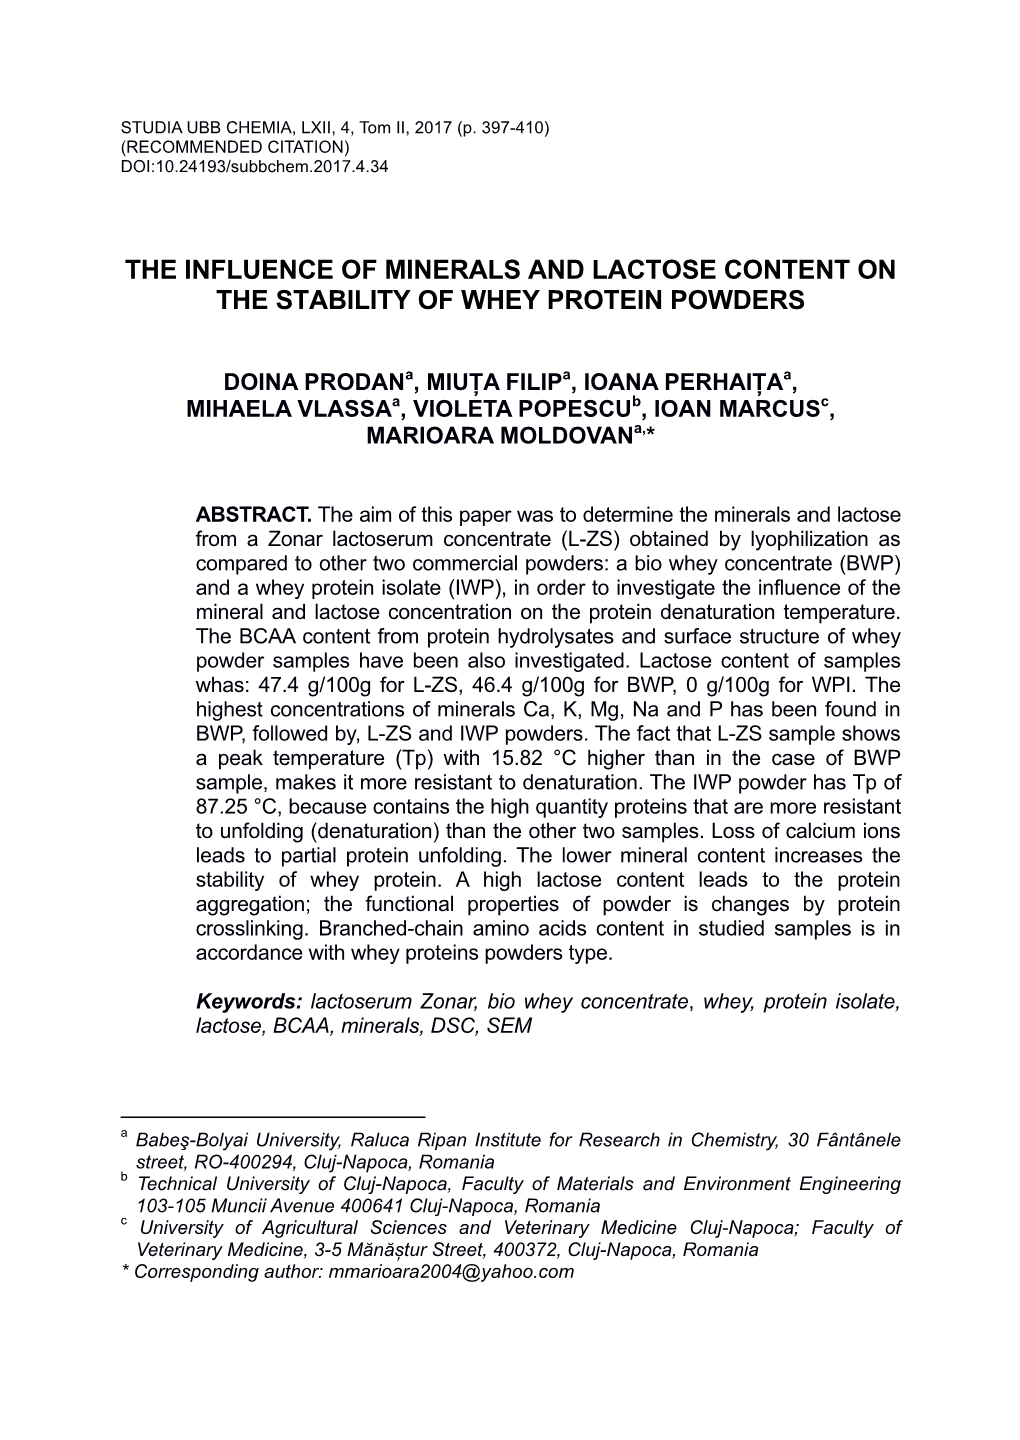 The Influence of Minerals and Lactose Content on the Stability of Whey Protein Powders